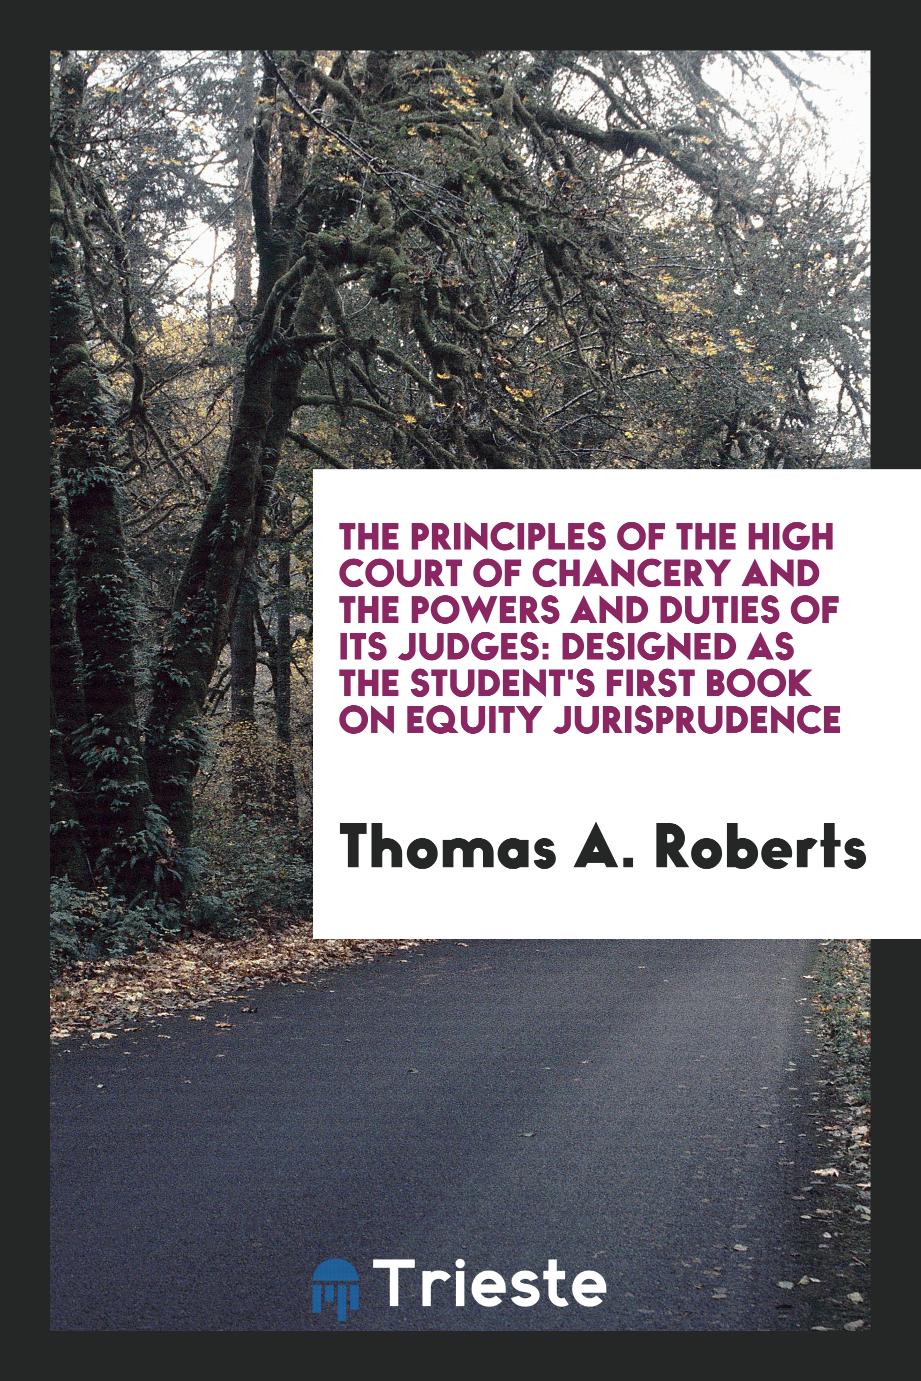 The Principles of the High Court of Chancery and the Powers and Duties of Its Judges: Designed as the Student's First Book on Equity Jurisprudence